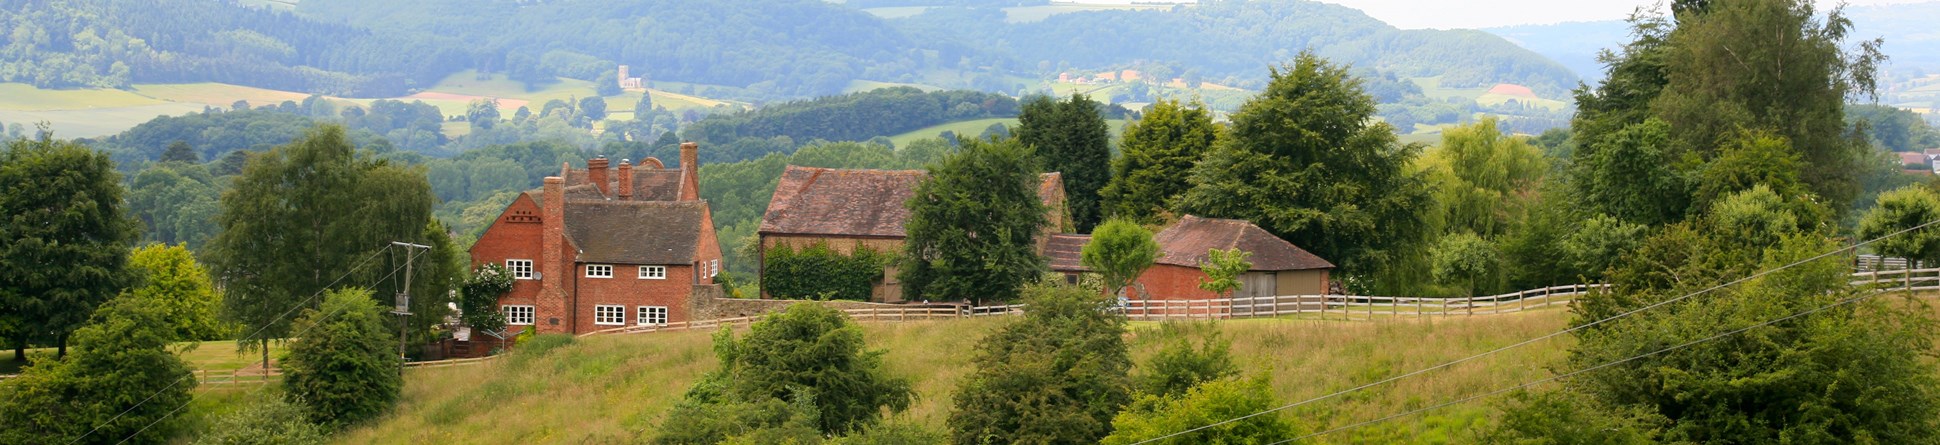 Traditional red brick house and farm buildings set in rolling countryside.